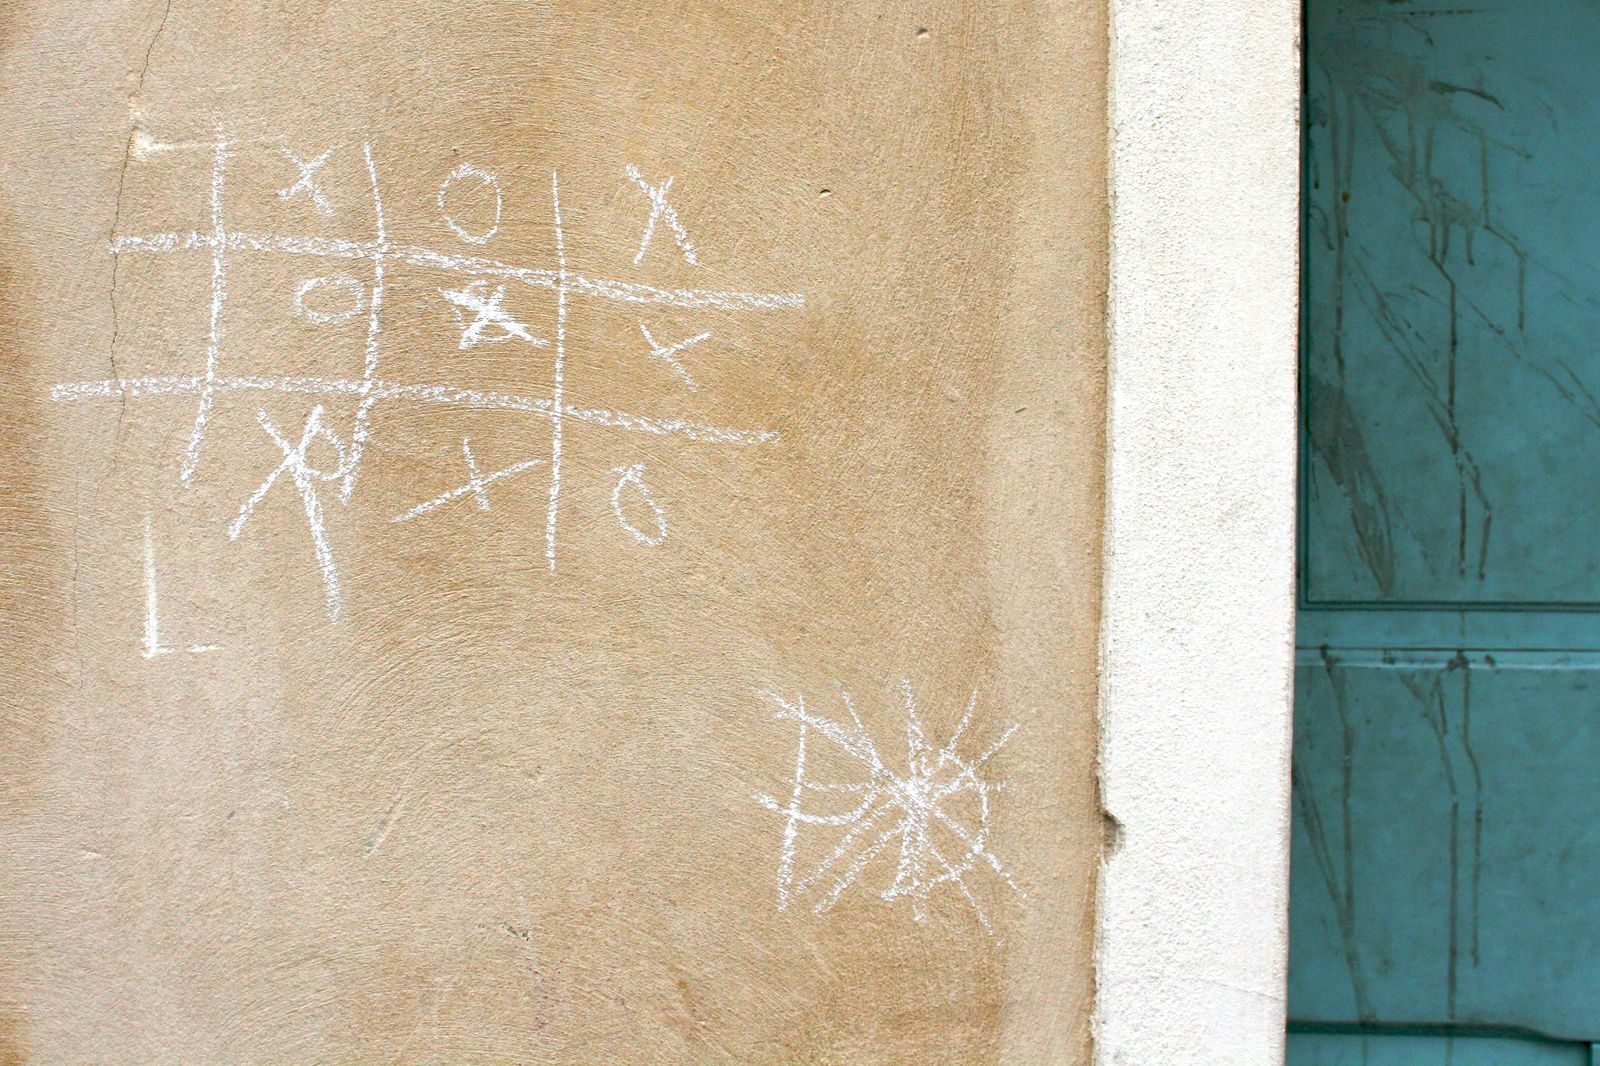 A wall with a completed tic-tac-toe game drawn on it in chalk.